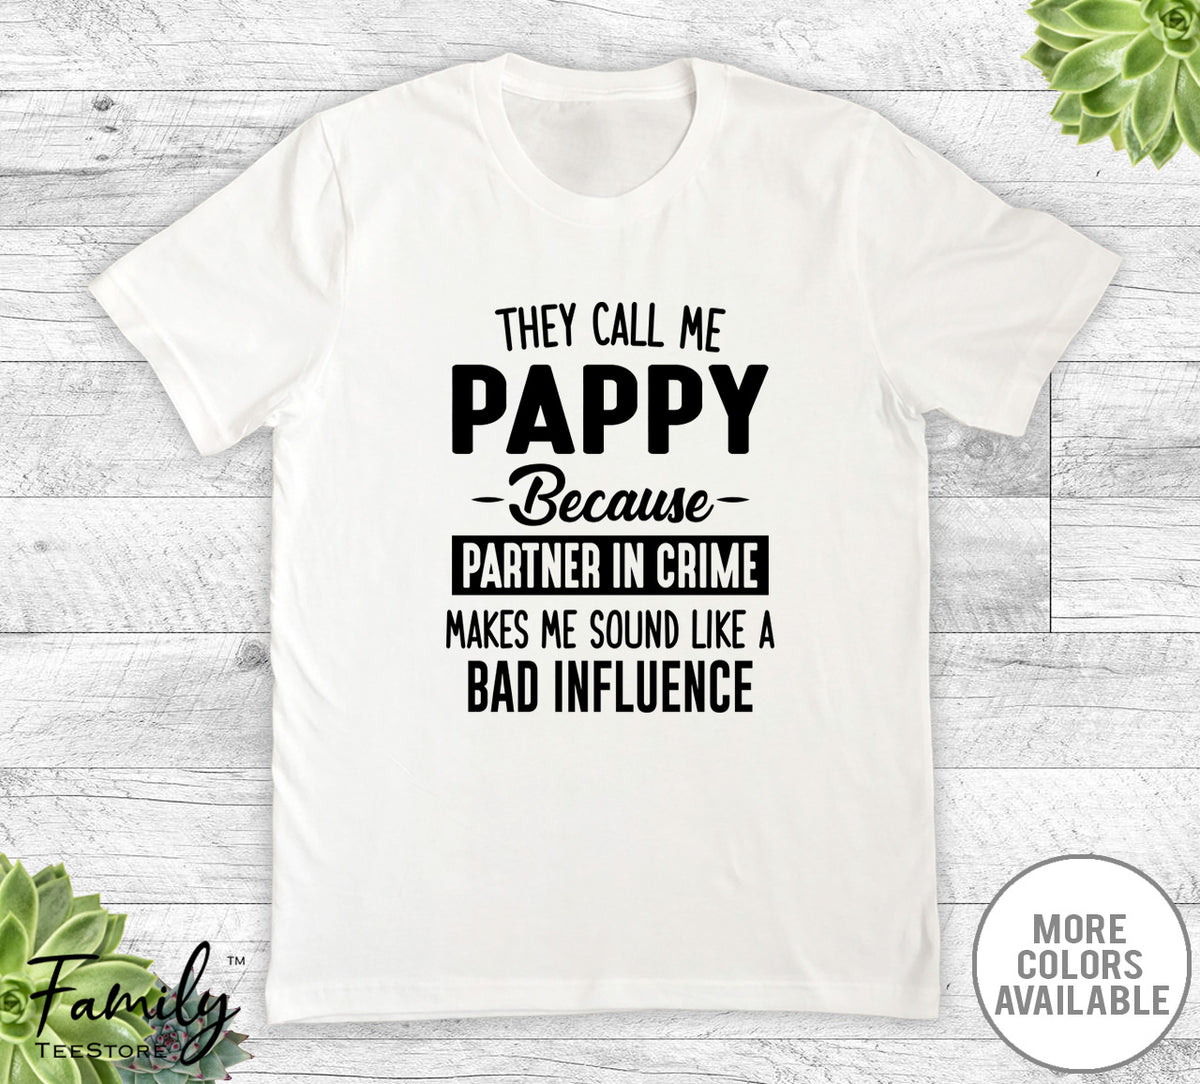 They Call Me Pappy Because Partner In Crime... - Unisex T-shirt - Pappy Shirt - Pappy Gift